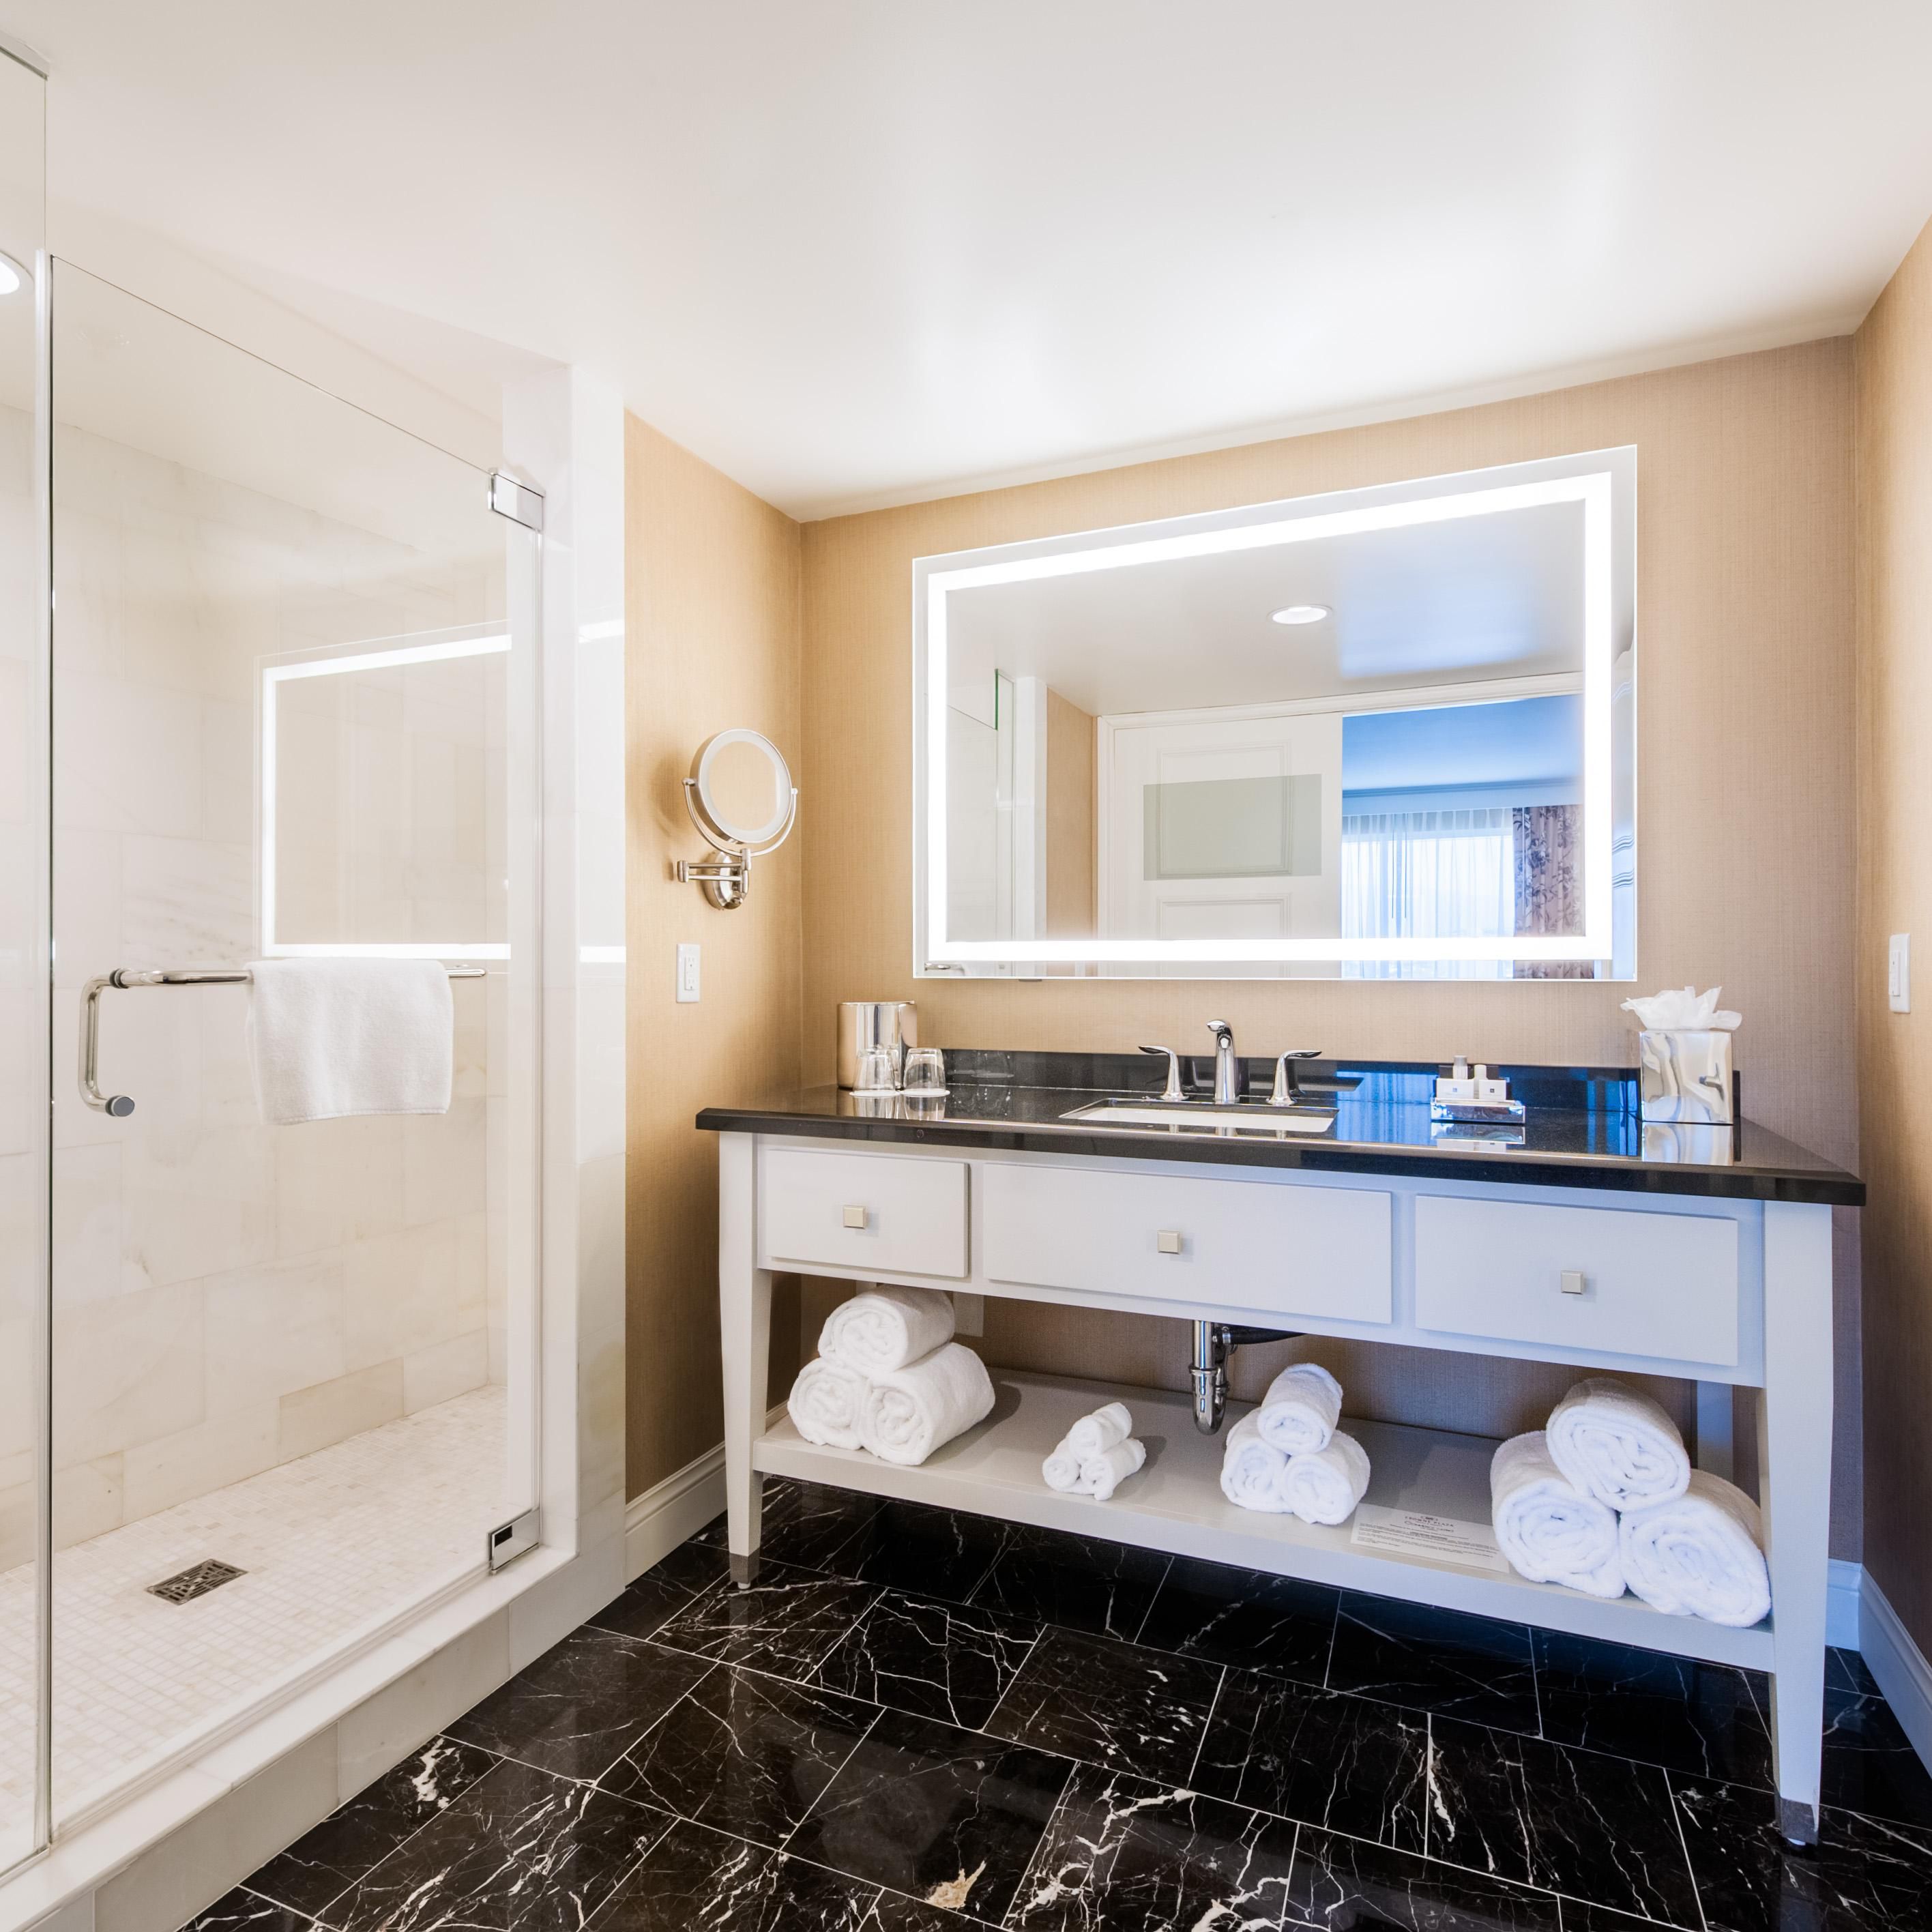 Get ready in style in the 2 room king suite bathroom